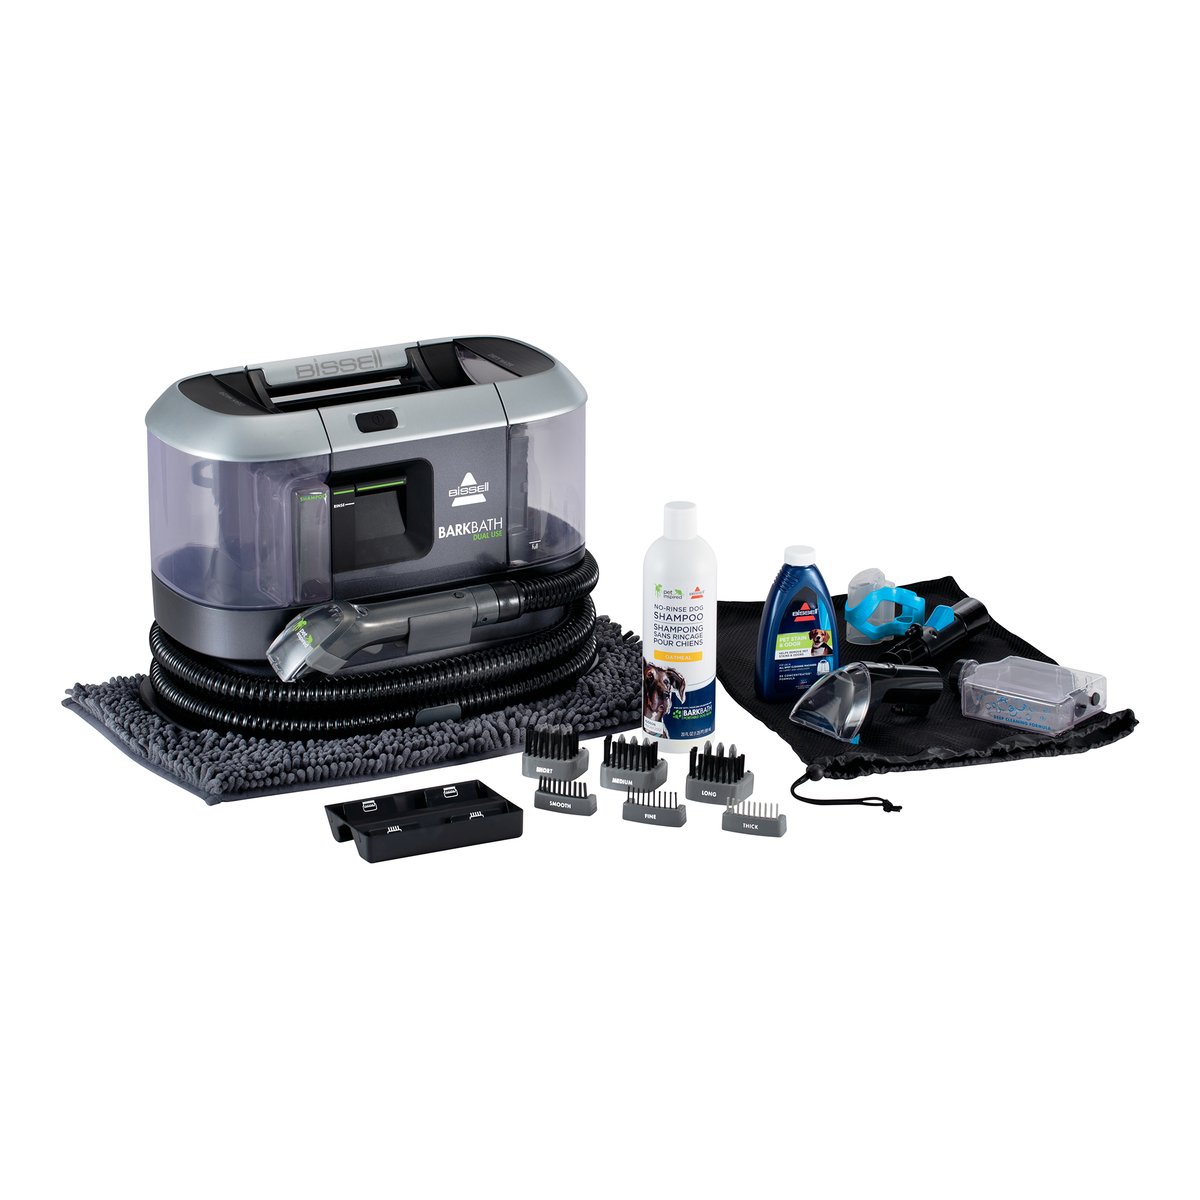 Bissell BARKBATH 2in1 Dog Bath & Grooming  & Portable Deep Wet & Dry Vacuum Cleaner 31149 2LTR 475W